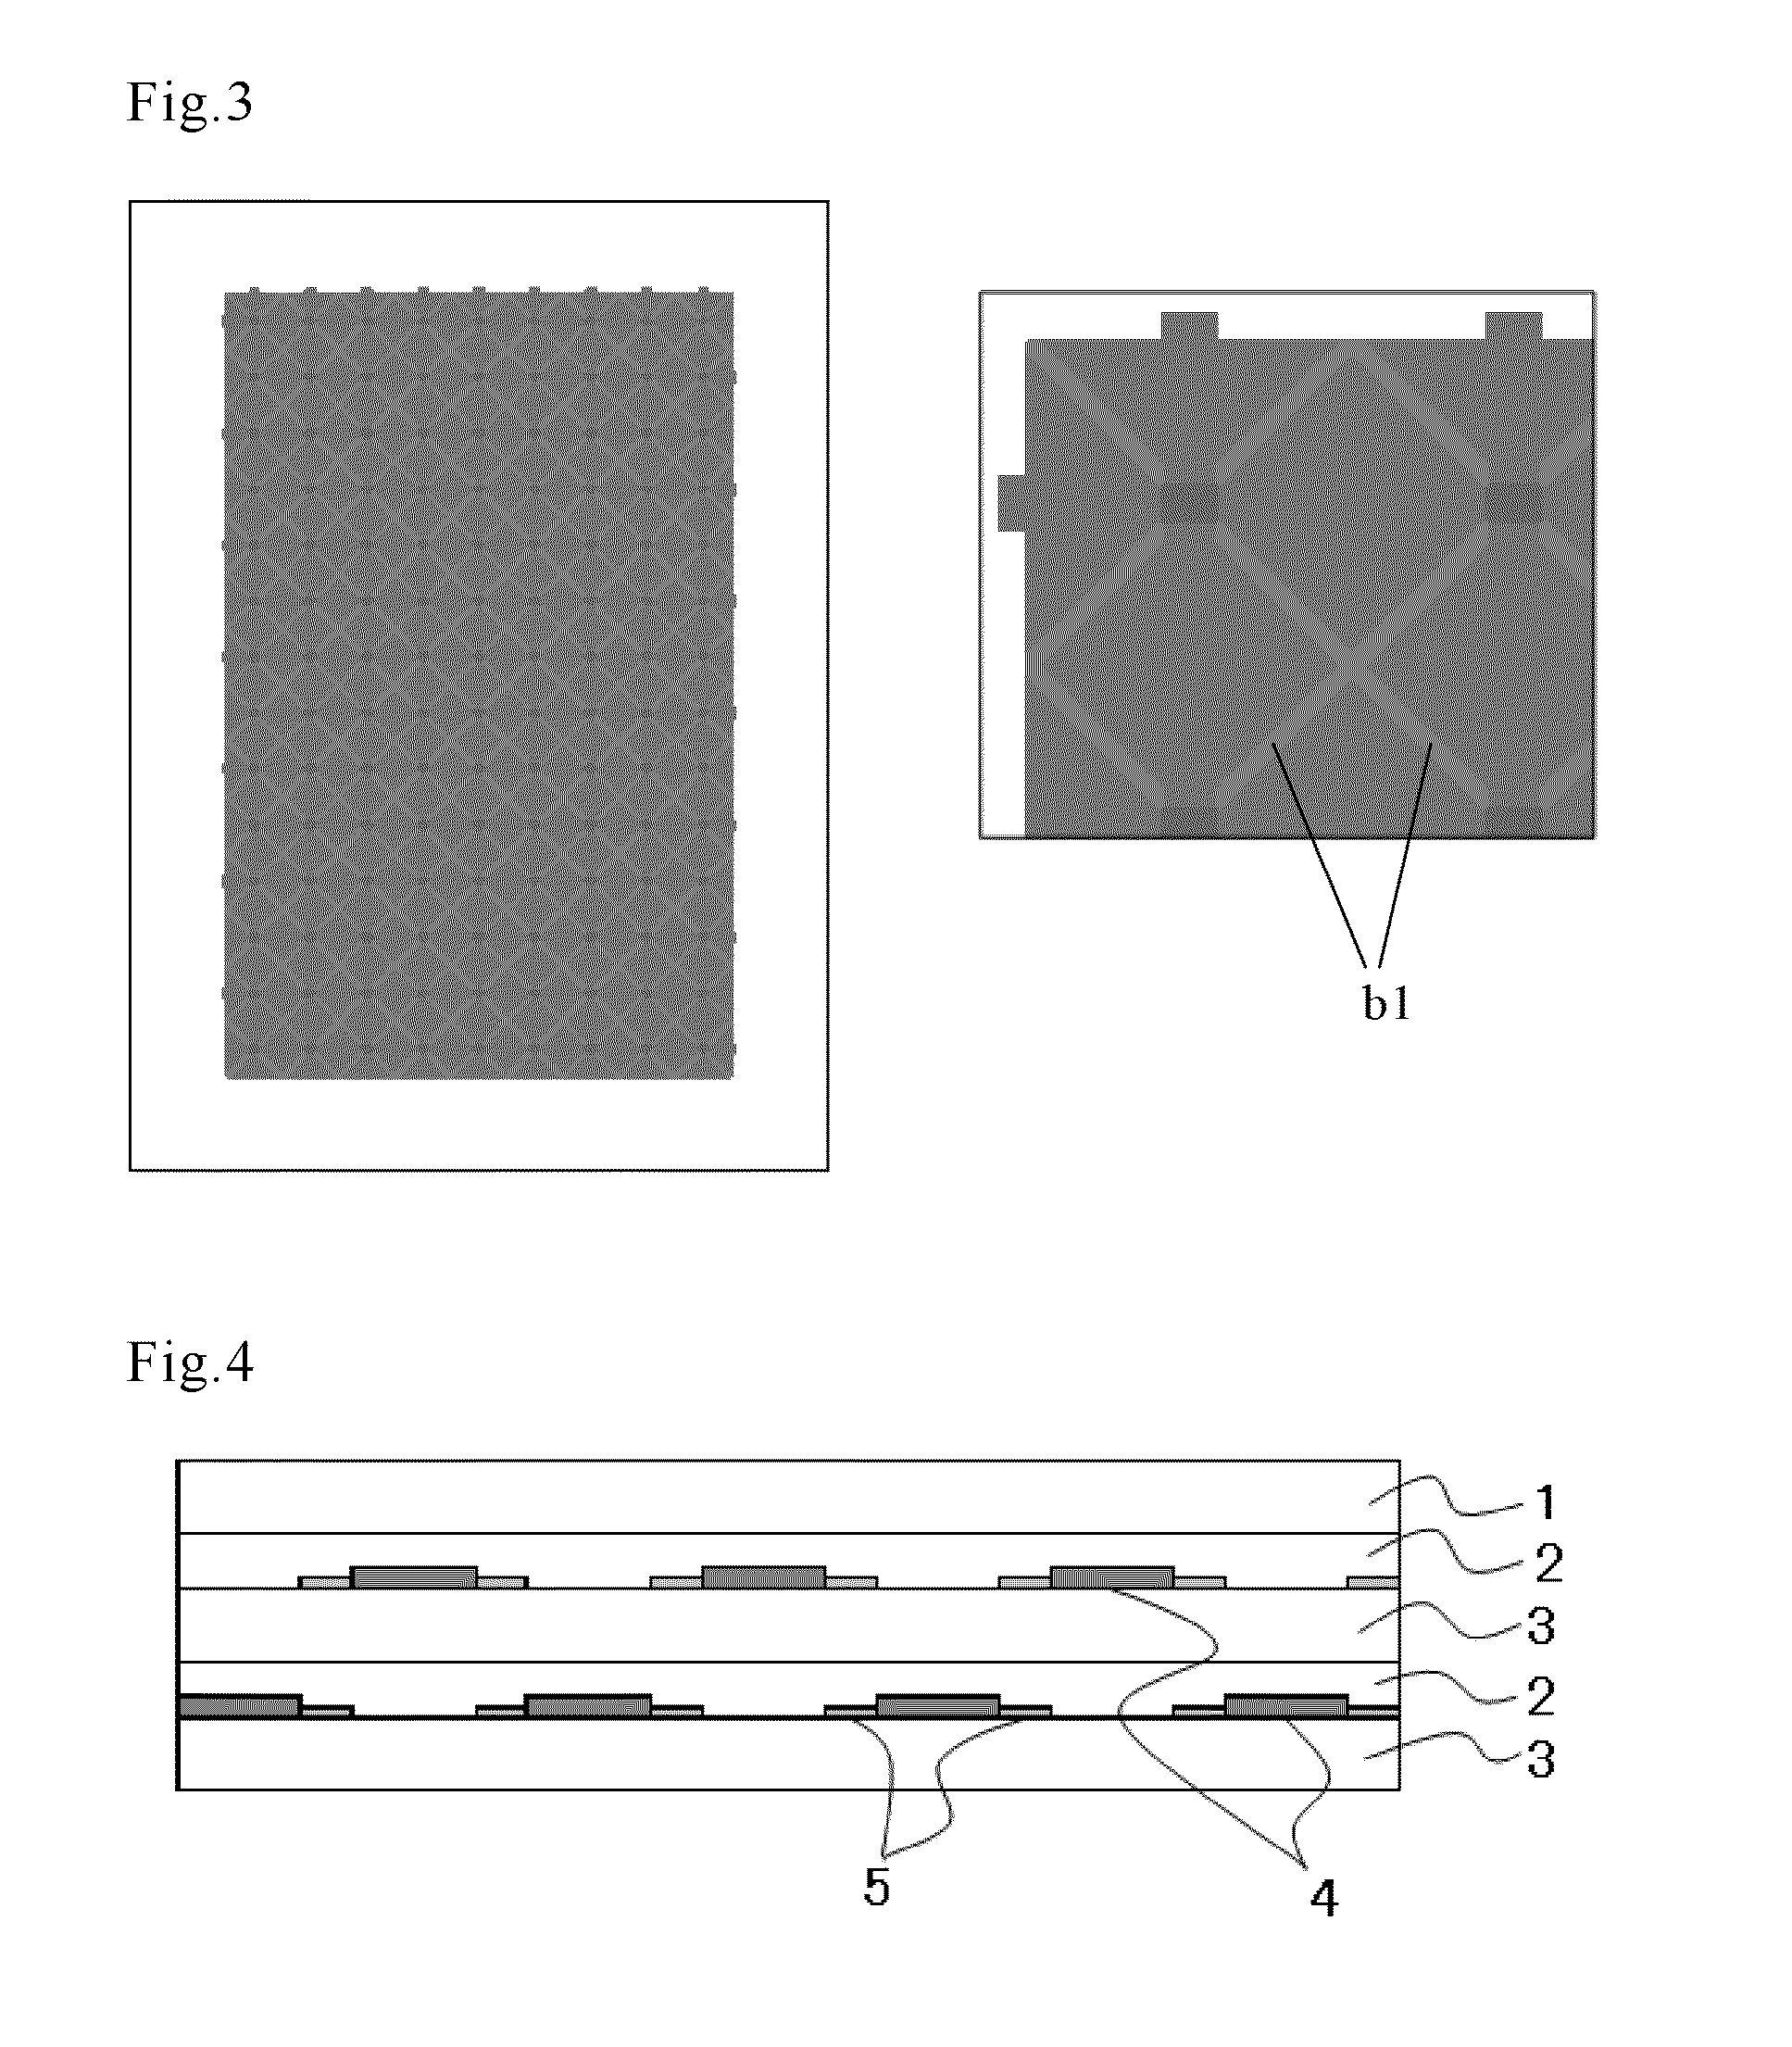 Substrate having transparent conductive layer, method for producing same, transparent conductive film laminate for touch panel, and touch panel